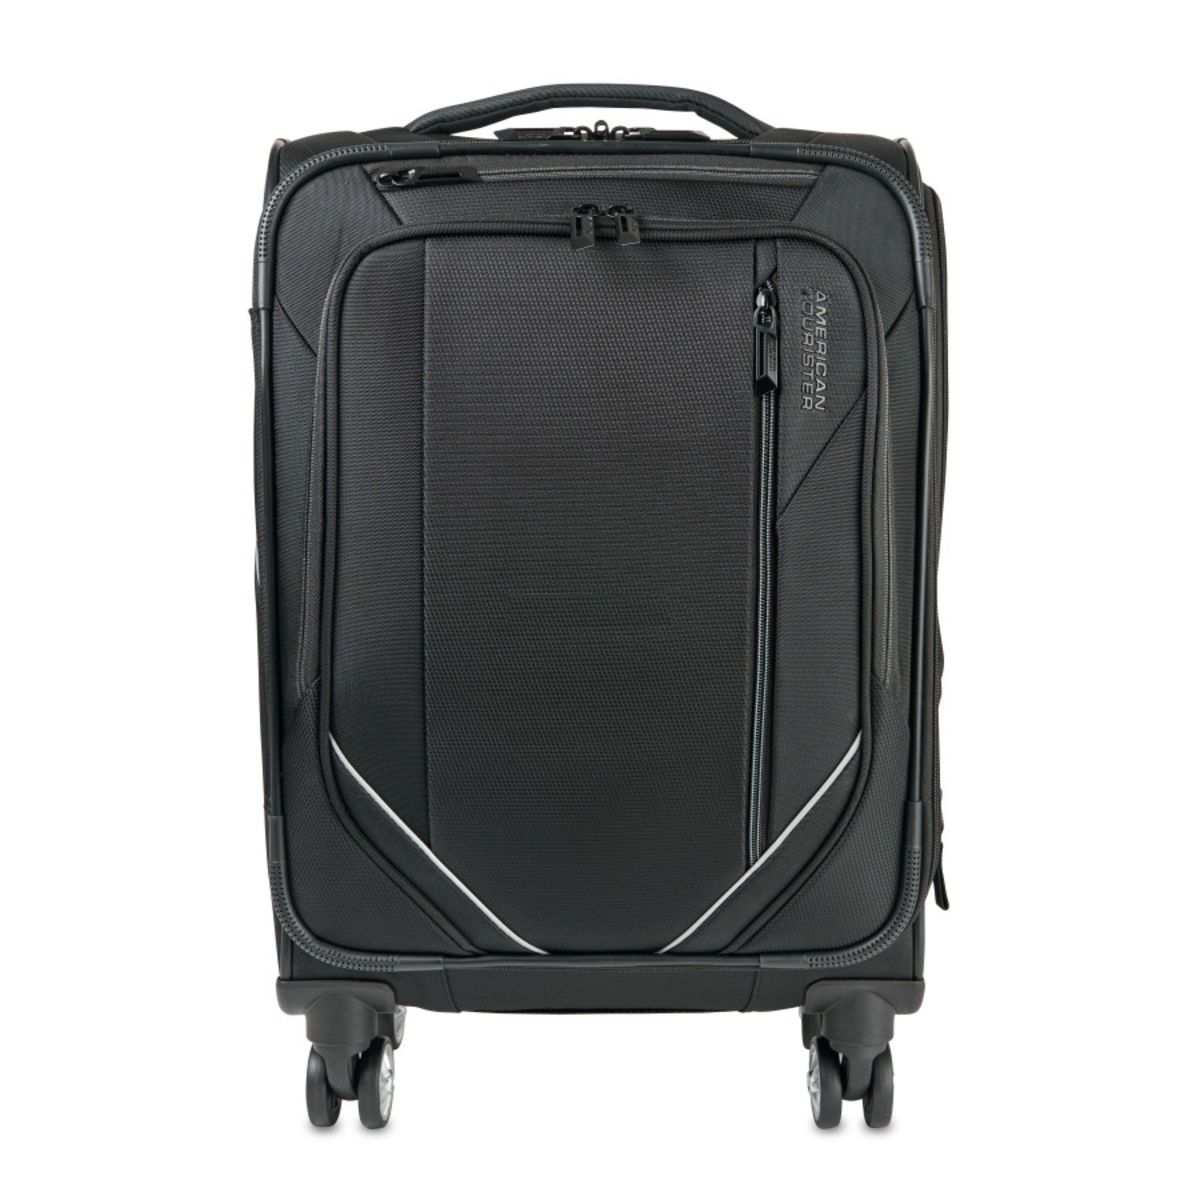 American Tourister® Zoom Turbo 20" Spinner Carry-On